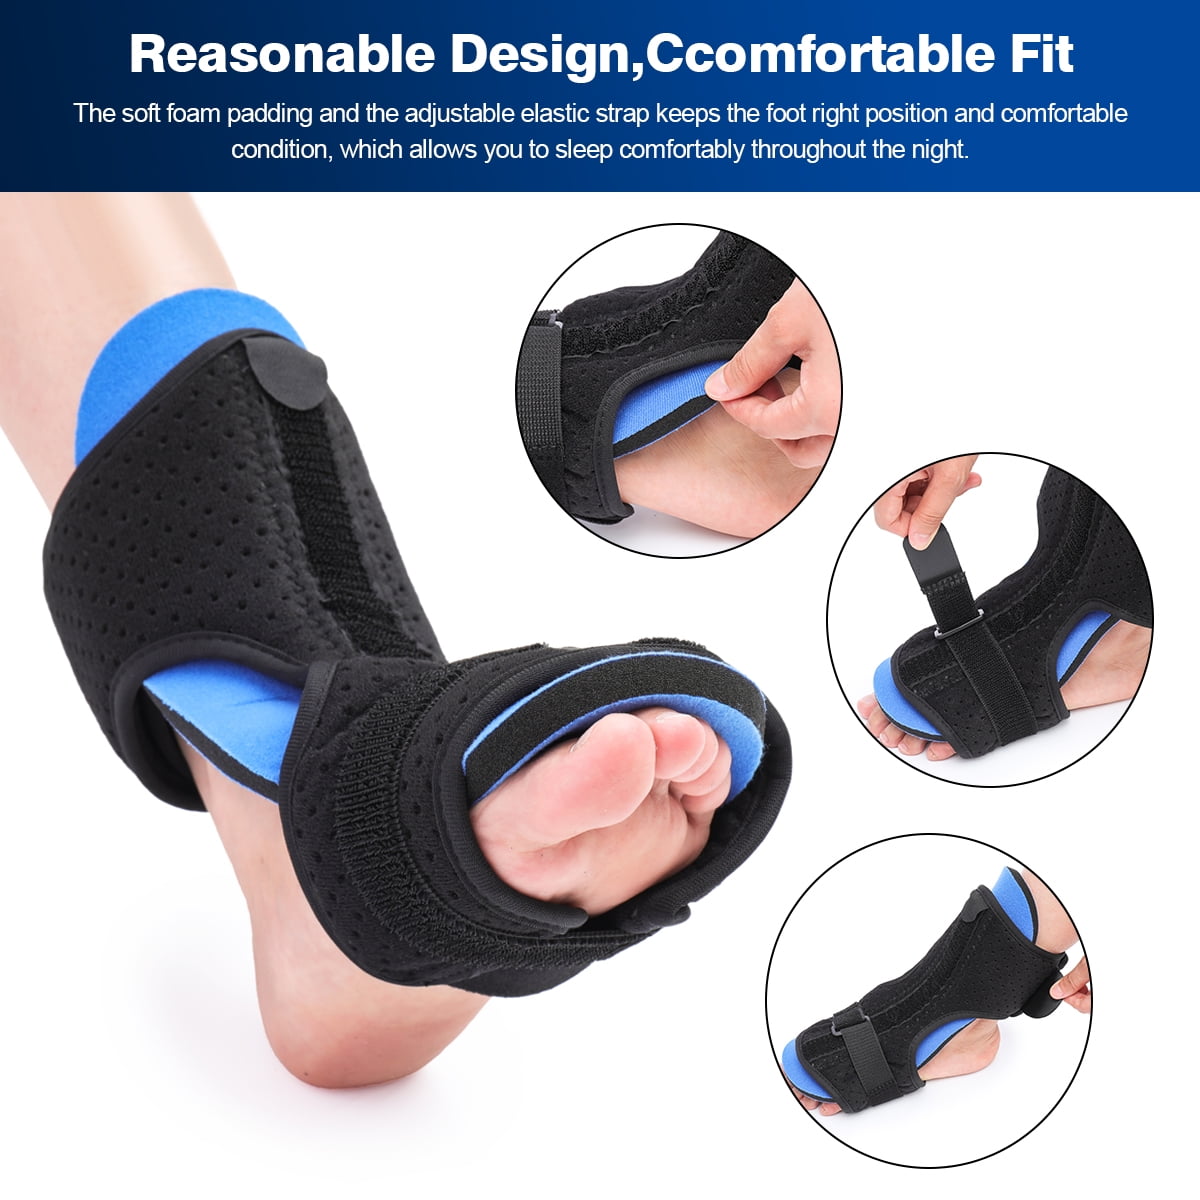 Ankle Splint Fascitis Plantar Posterior Foot Brace Strap Protector Strophe OPO Dia Orthosis Support Prevent Foot Drop and Relief Pain at night 